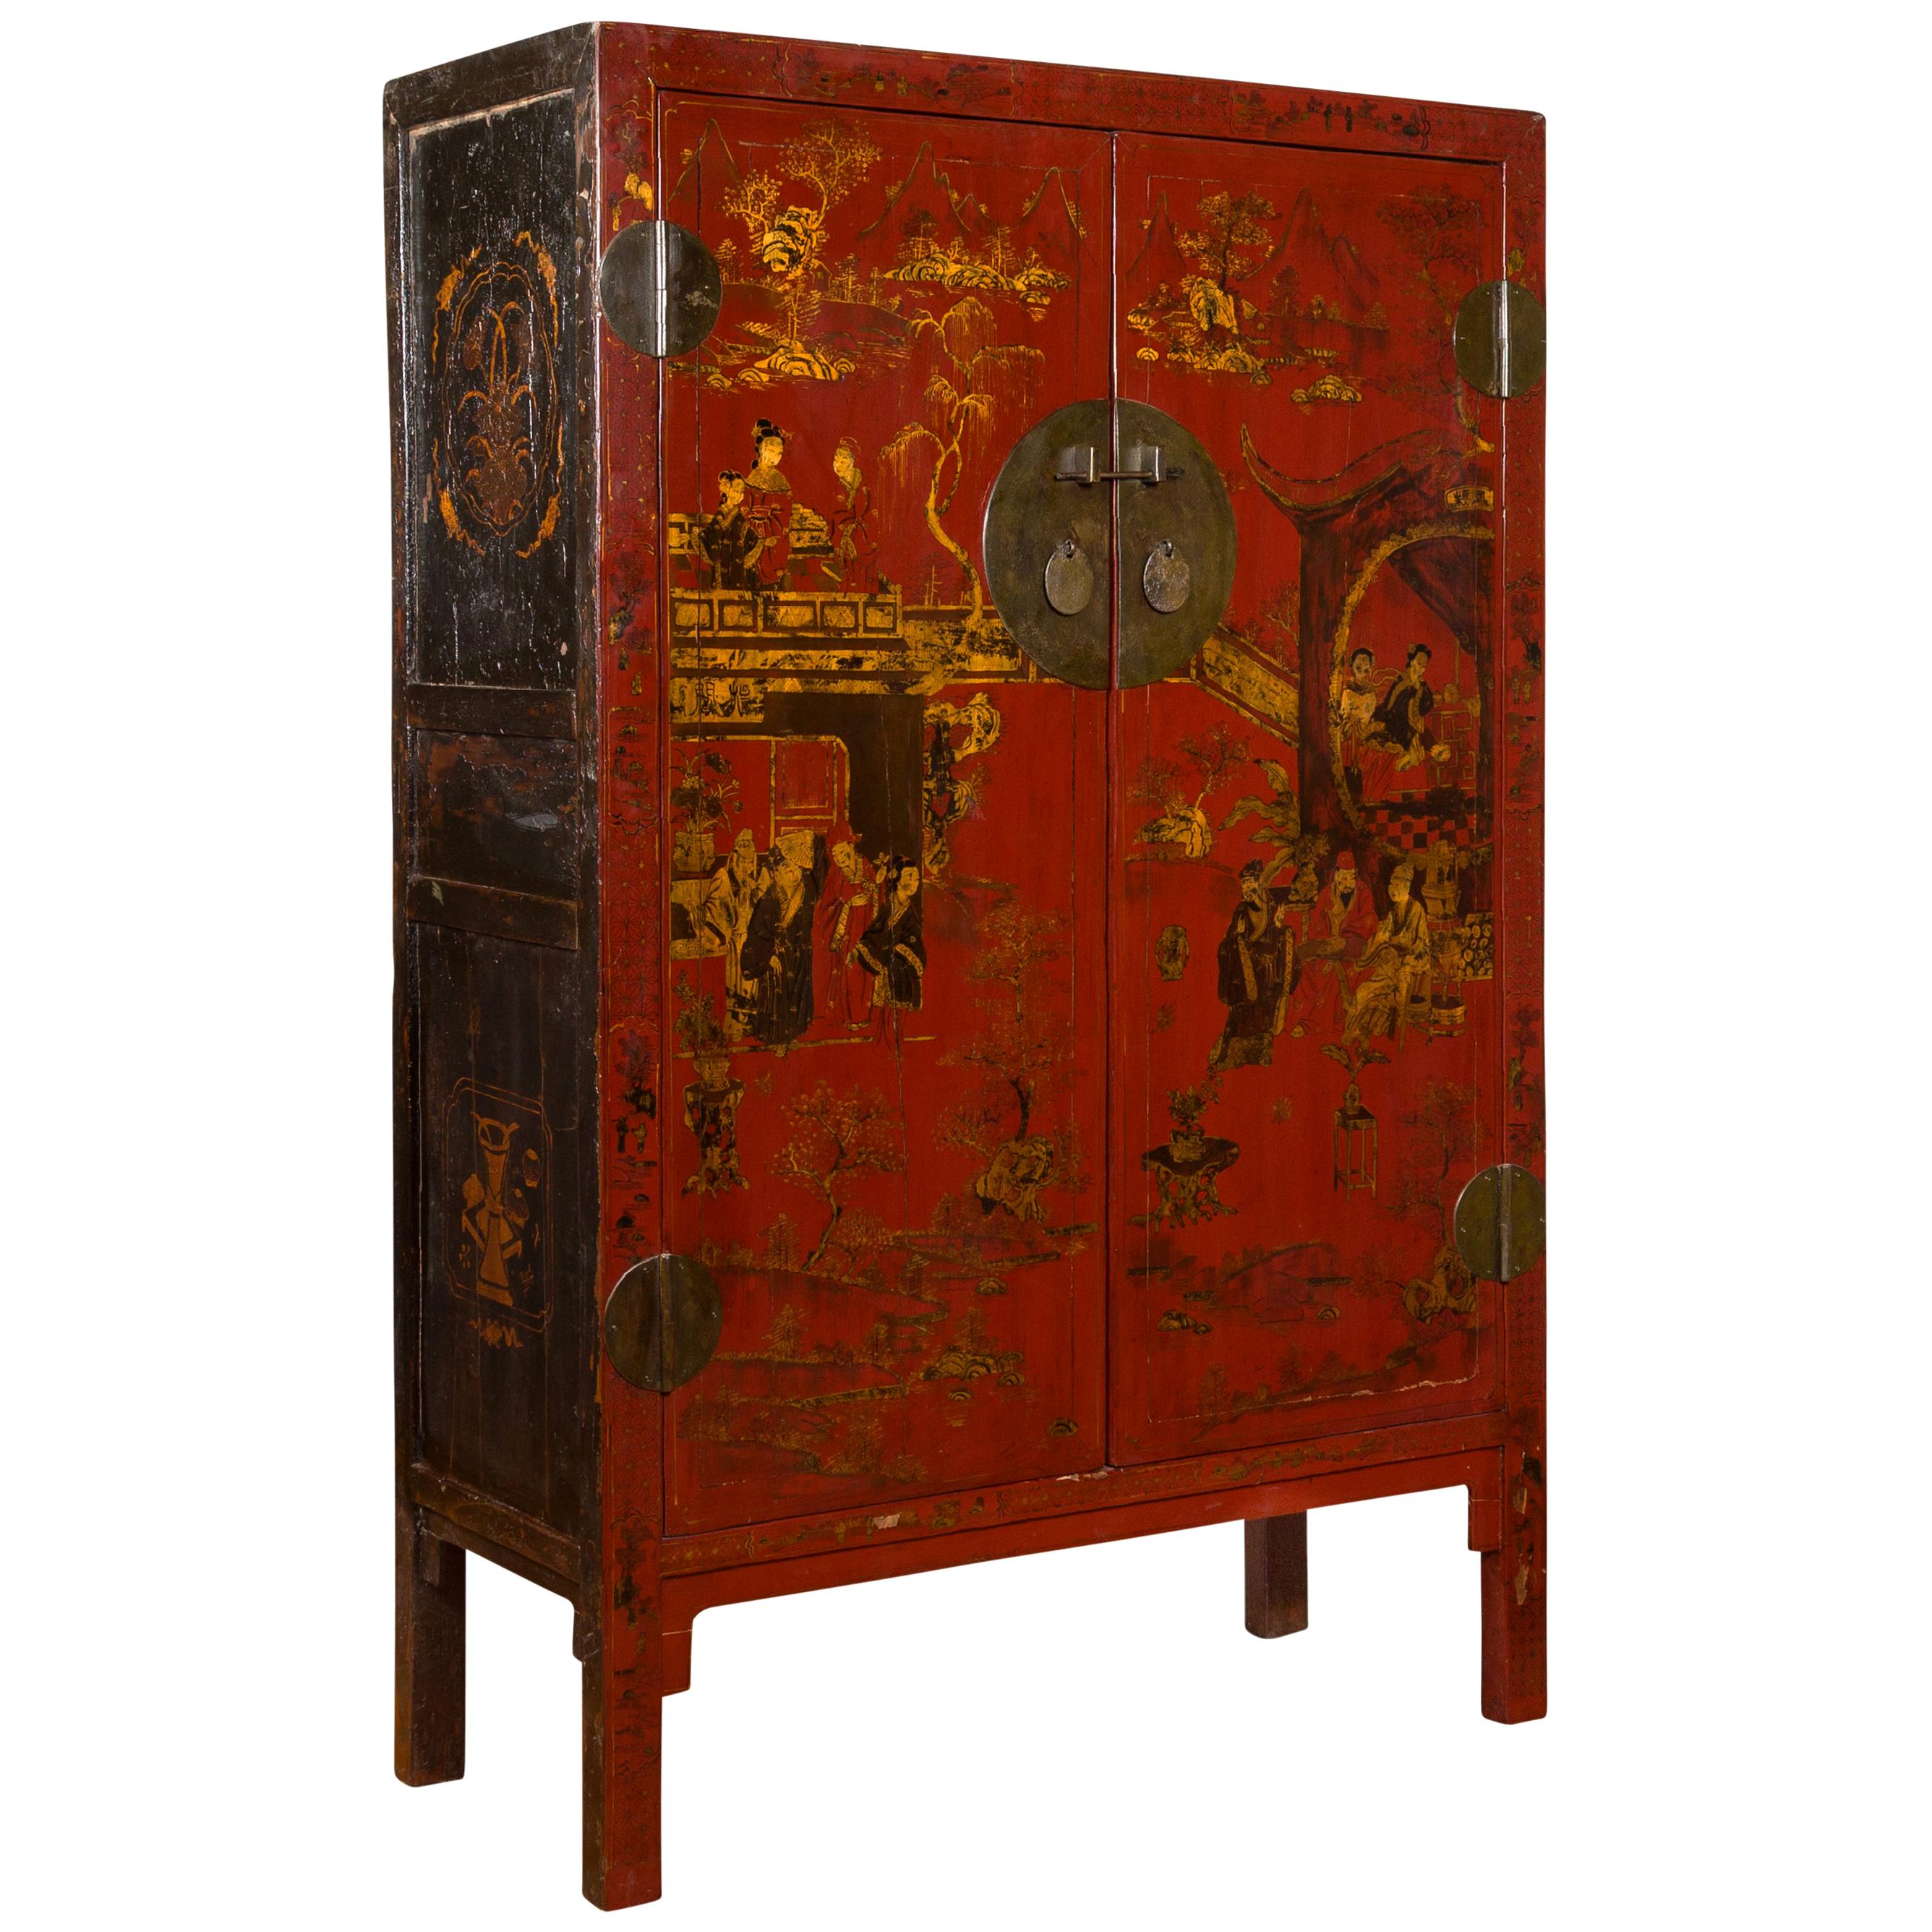 Chinese 19th Century Qing Dynasty Red Lacquered Cabinet with Chinoiserie Motifs